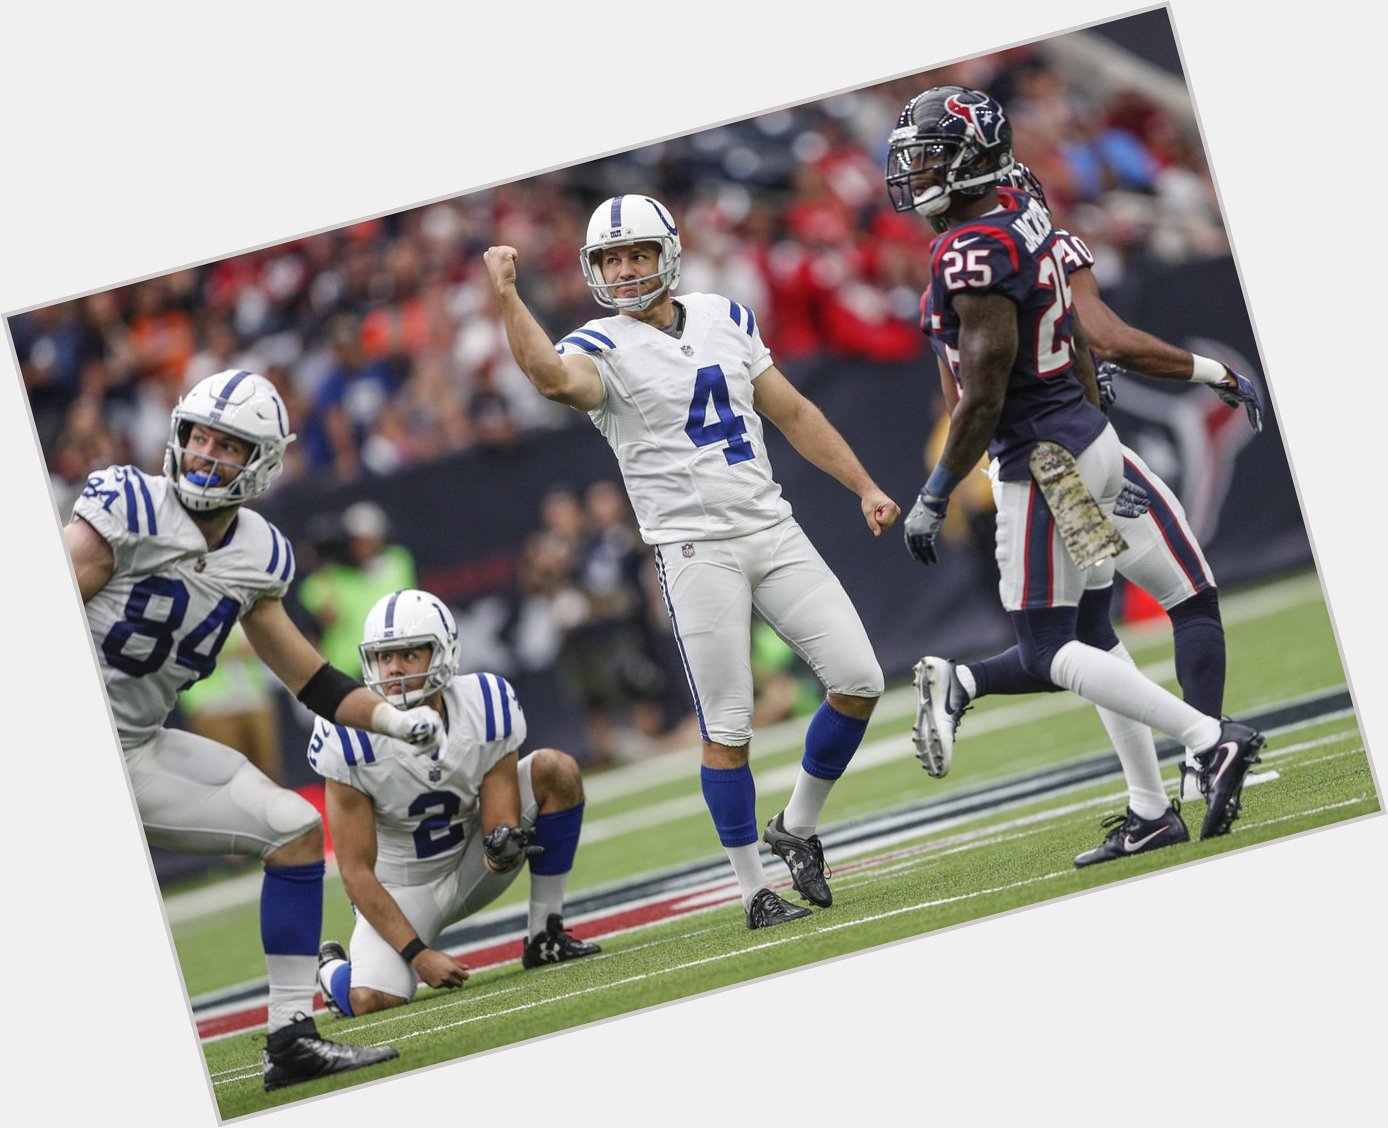 Happy 45th birthday to kicker Adam Vinatieri.

Others might know him as the . 